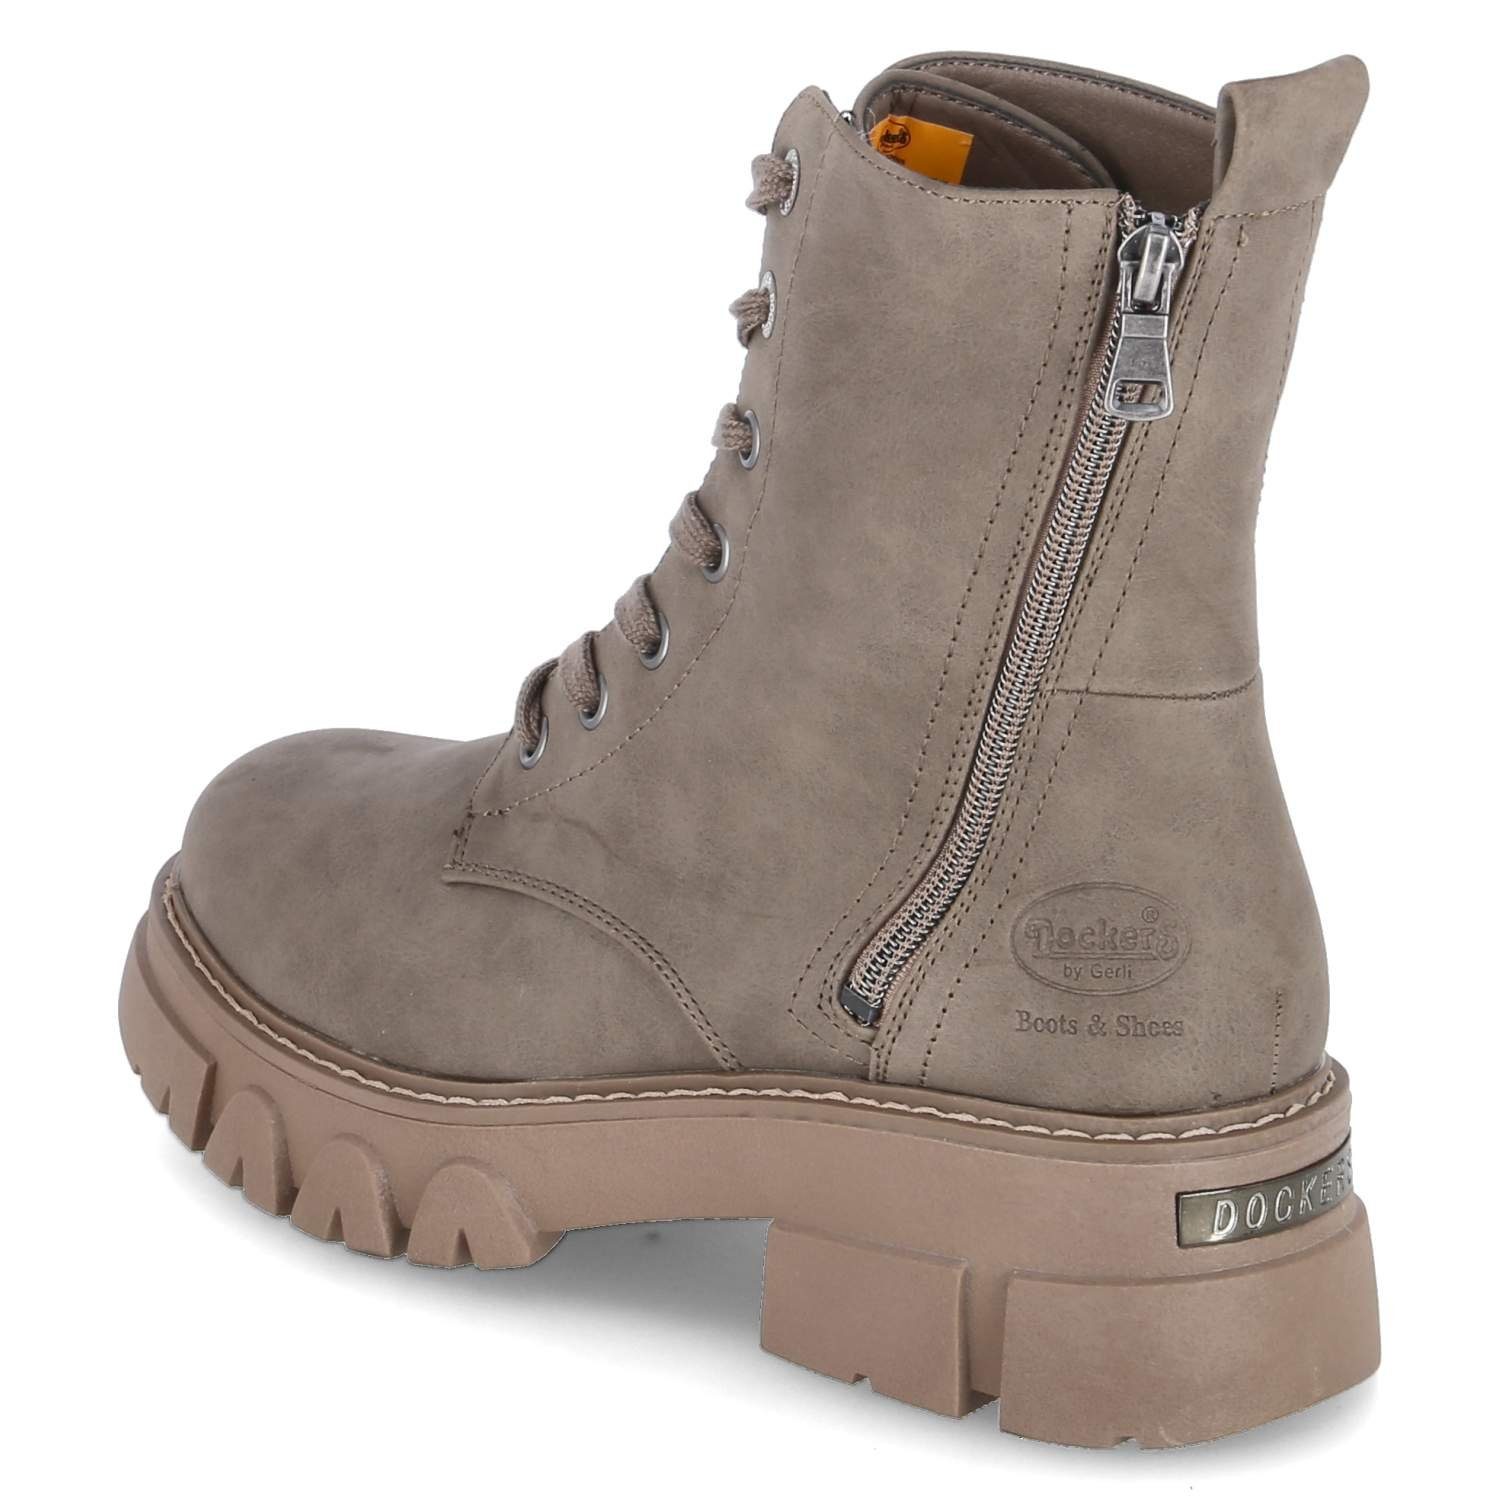 630430 Gerli Boots Schnürstiefel Combat Dockers by taupe